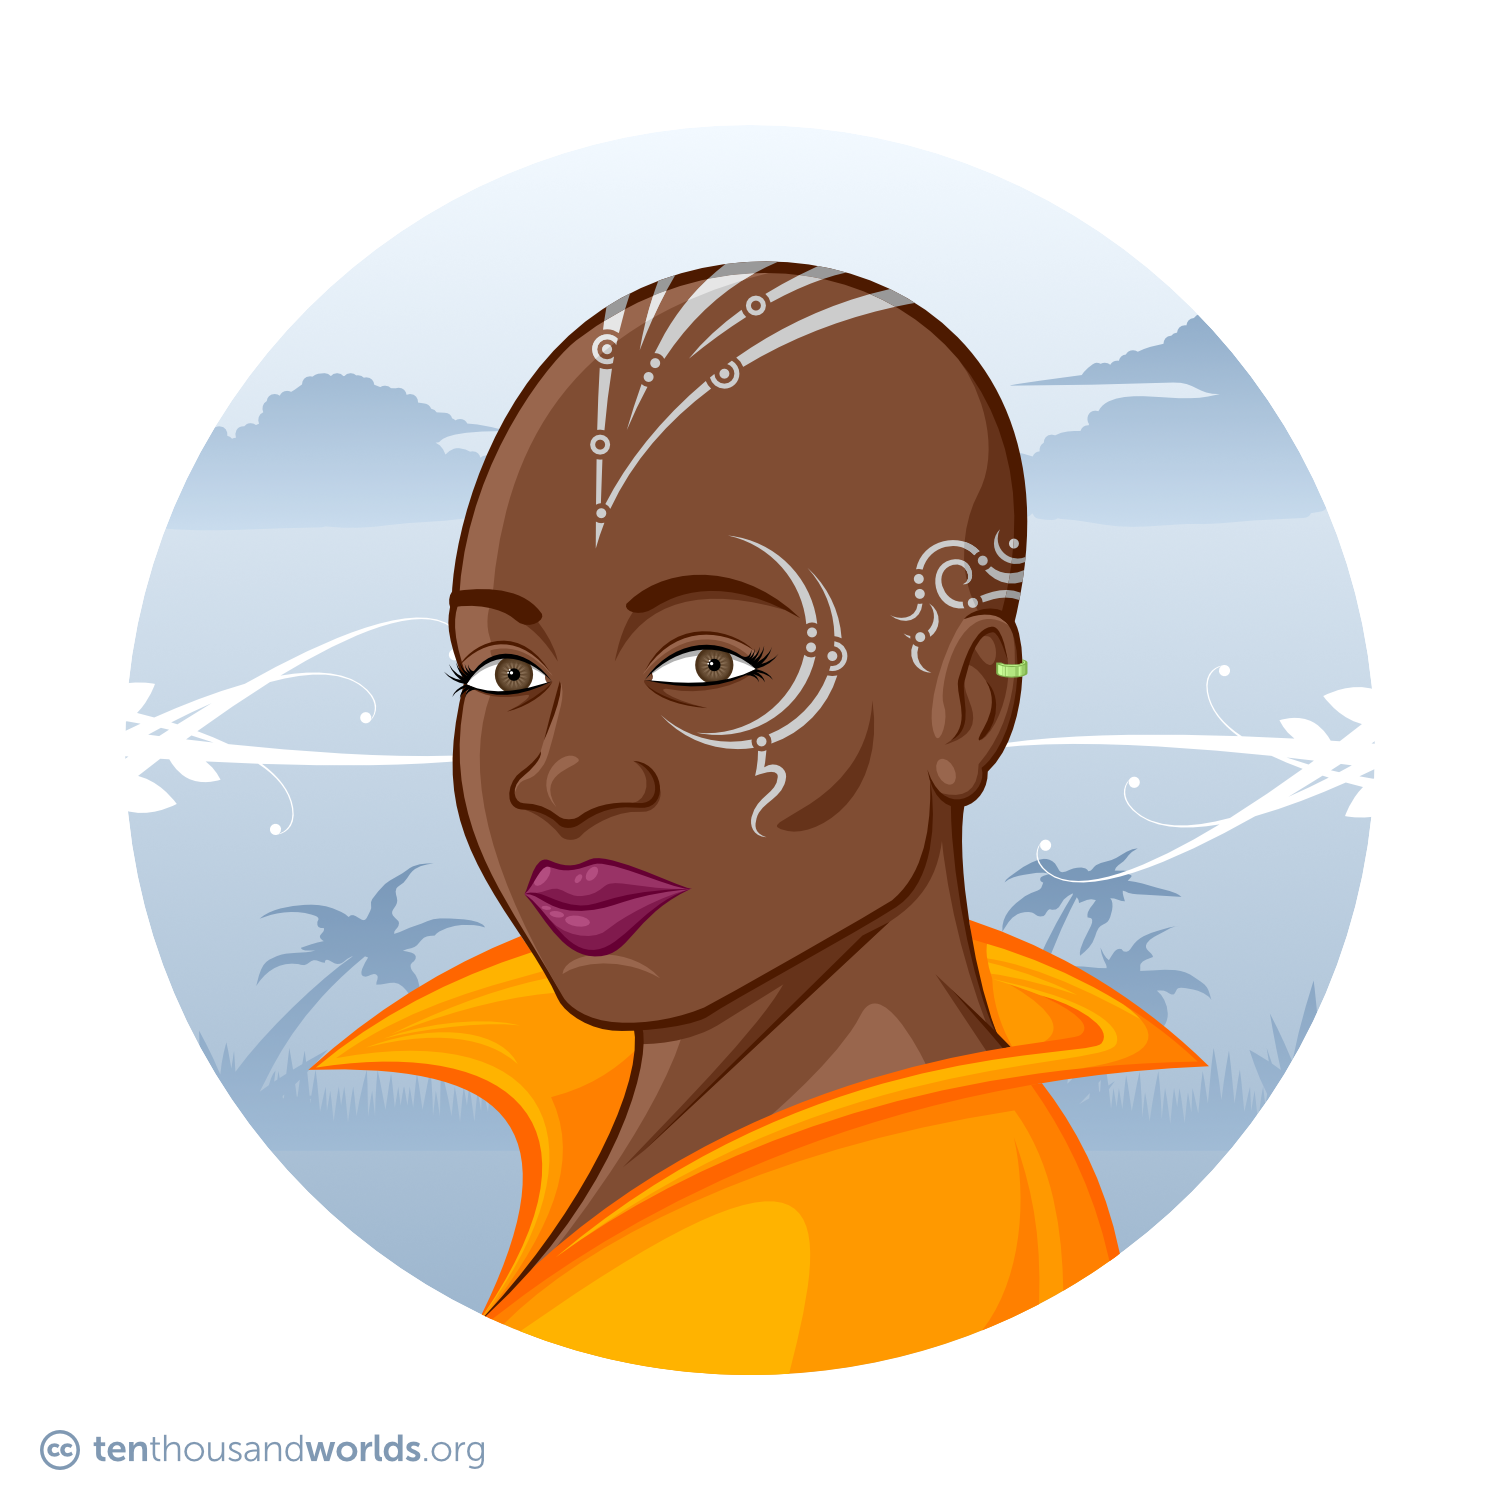 A mahogany-skinned woman with bright orange robes and a jade ear-clip, sporting several silvery, abstract, geometric tattoos on her shaved head. They are comprised of lines, arcs, dots, and circles. Some curl over her left ear from the back of her hear, others orbit her left eye, and many form a wedge at the top of her skull that points down between her eyes.